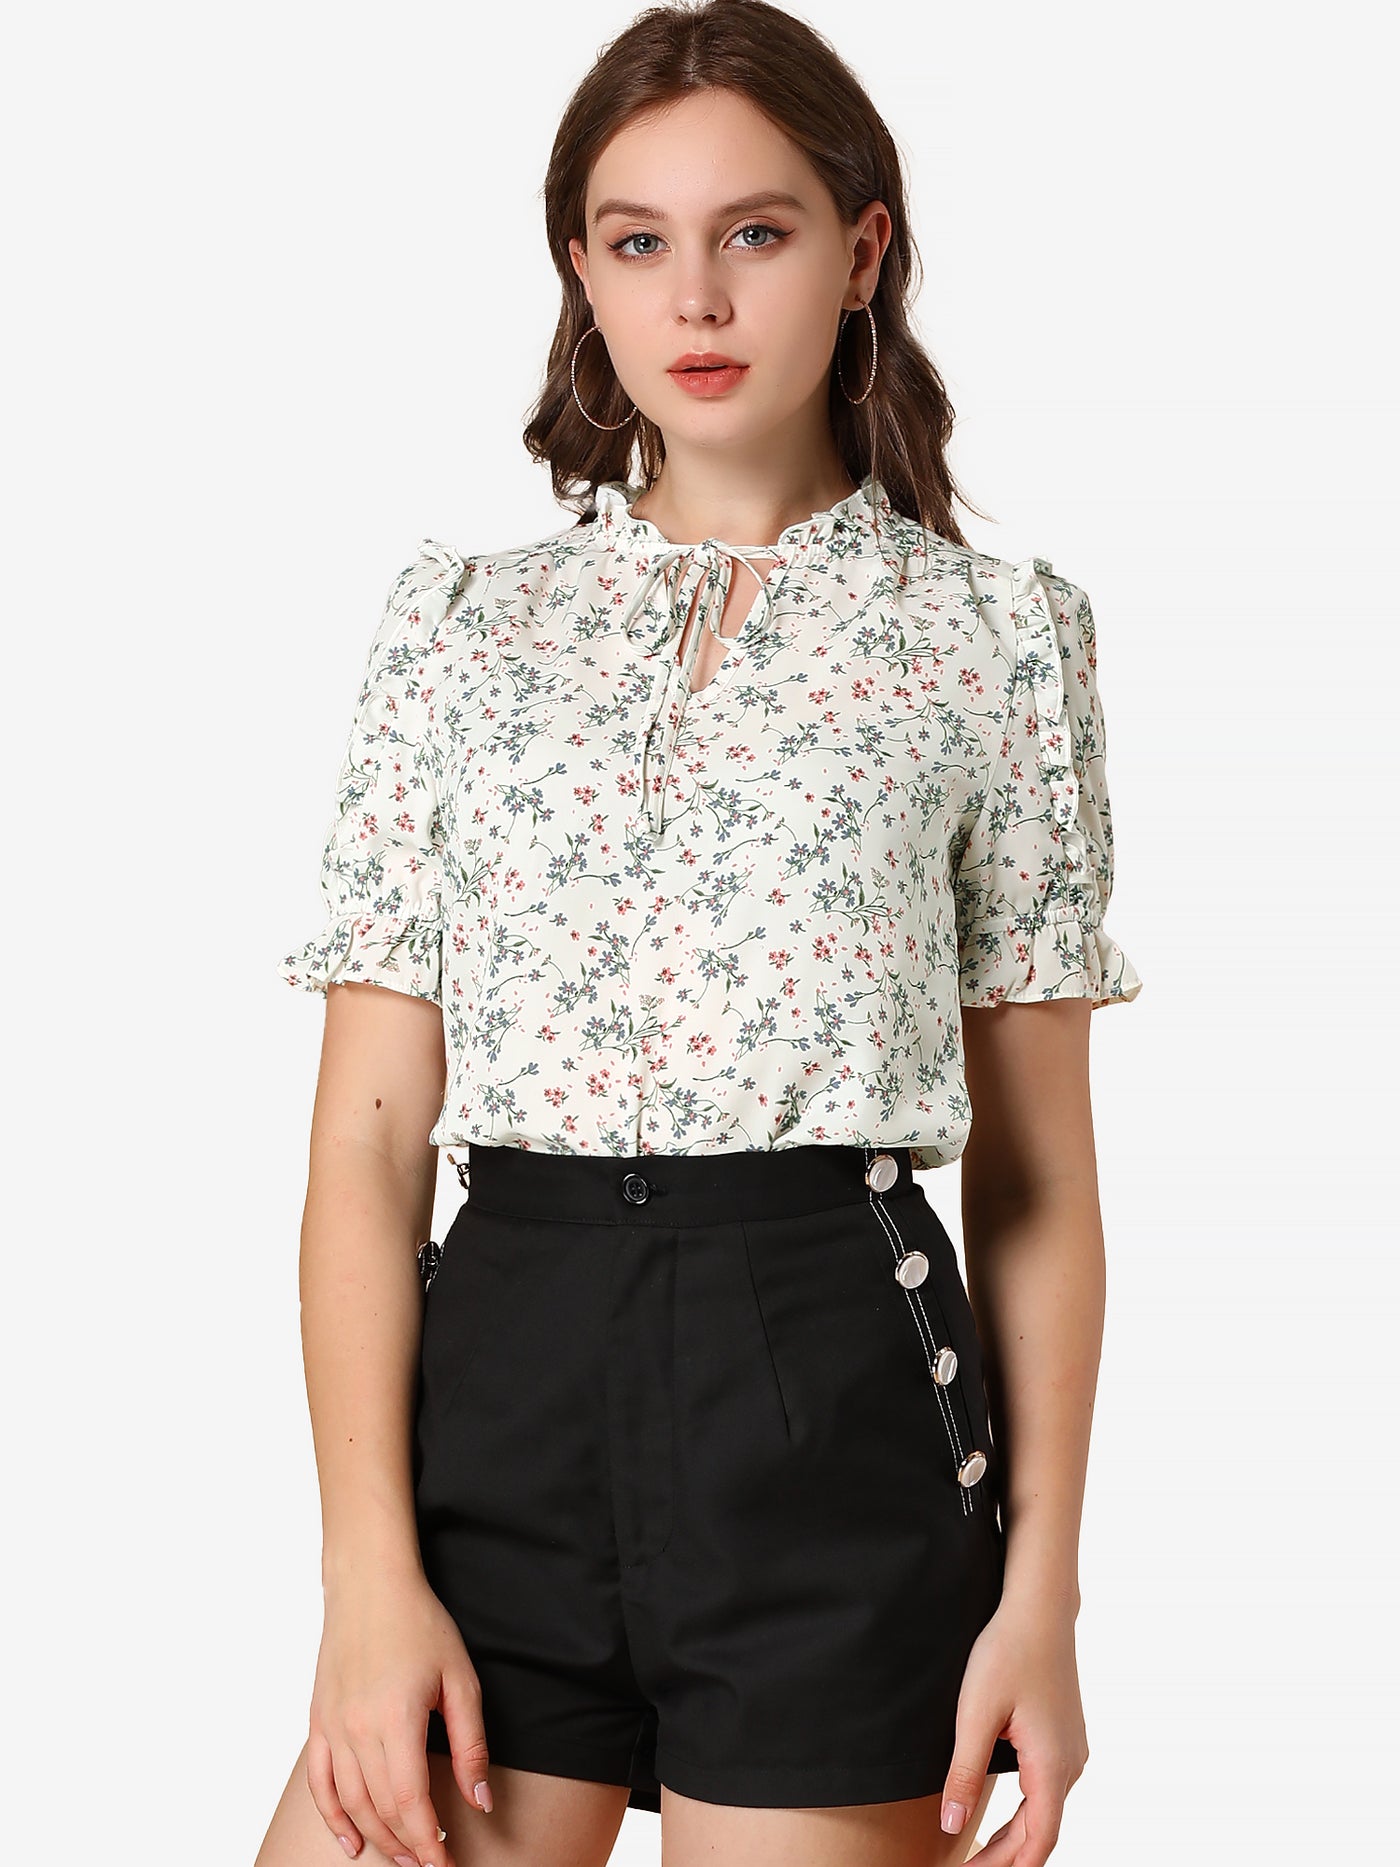 Allegra K Ruffle Tie Neck Puff Short Sleeve Casual Floral Blouse Top